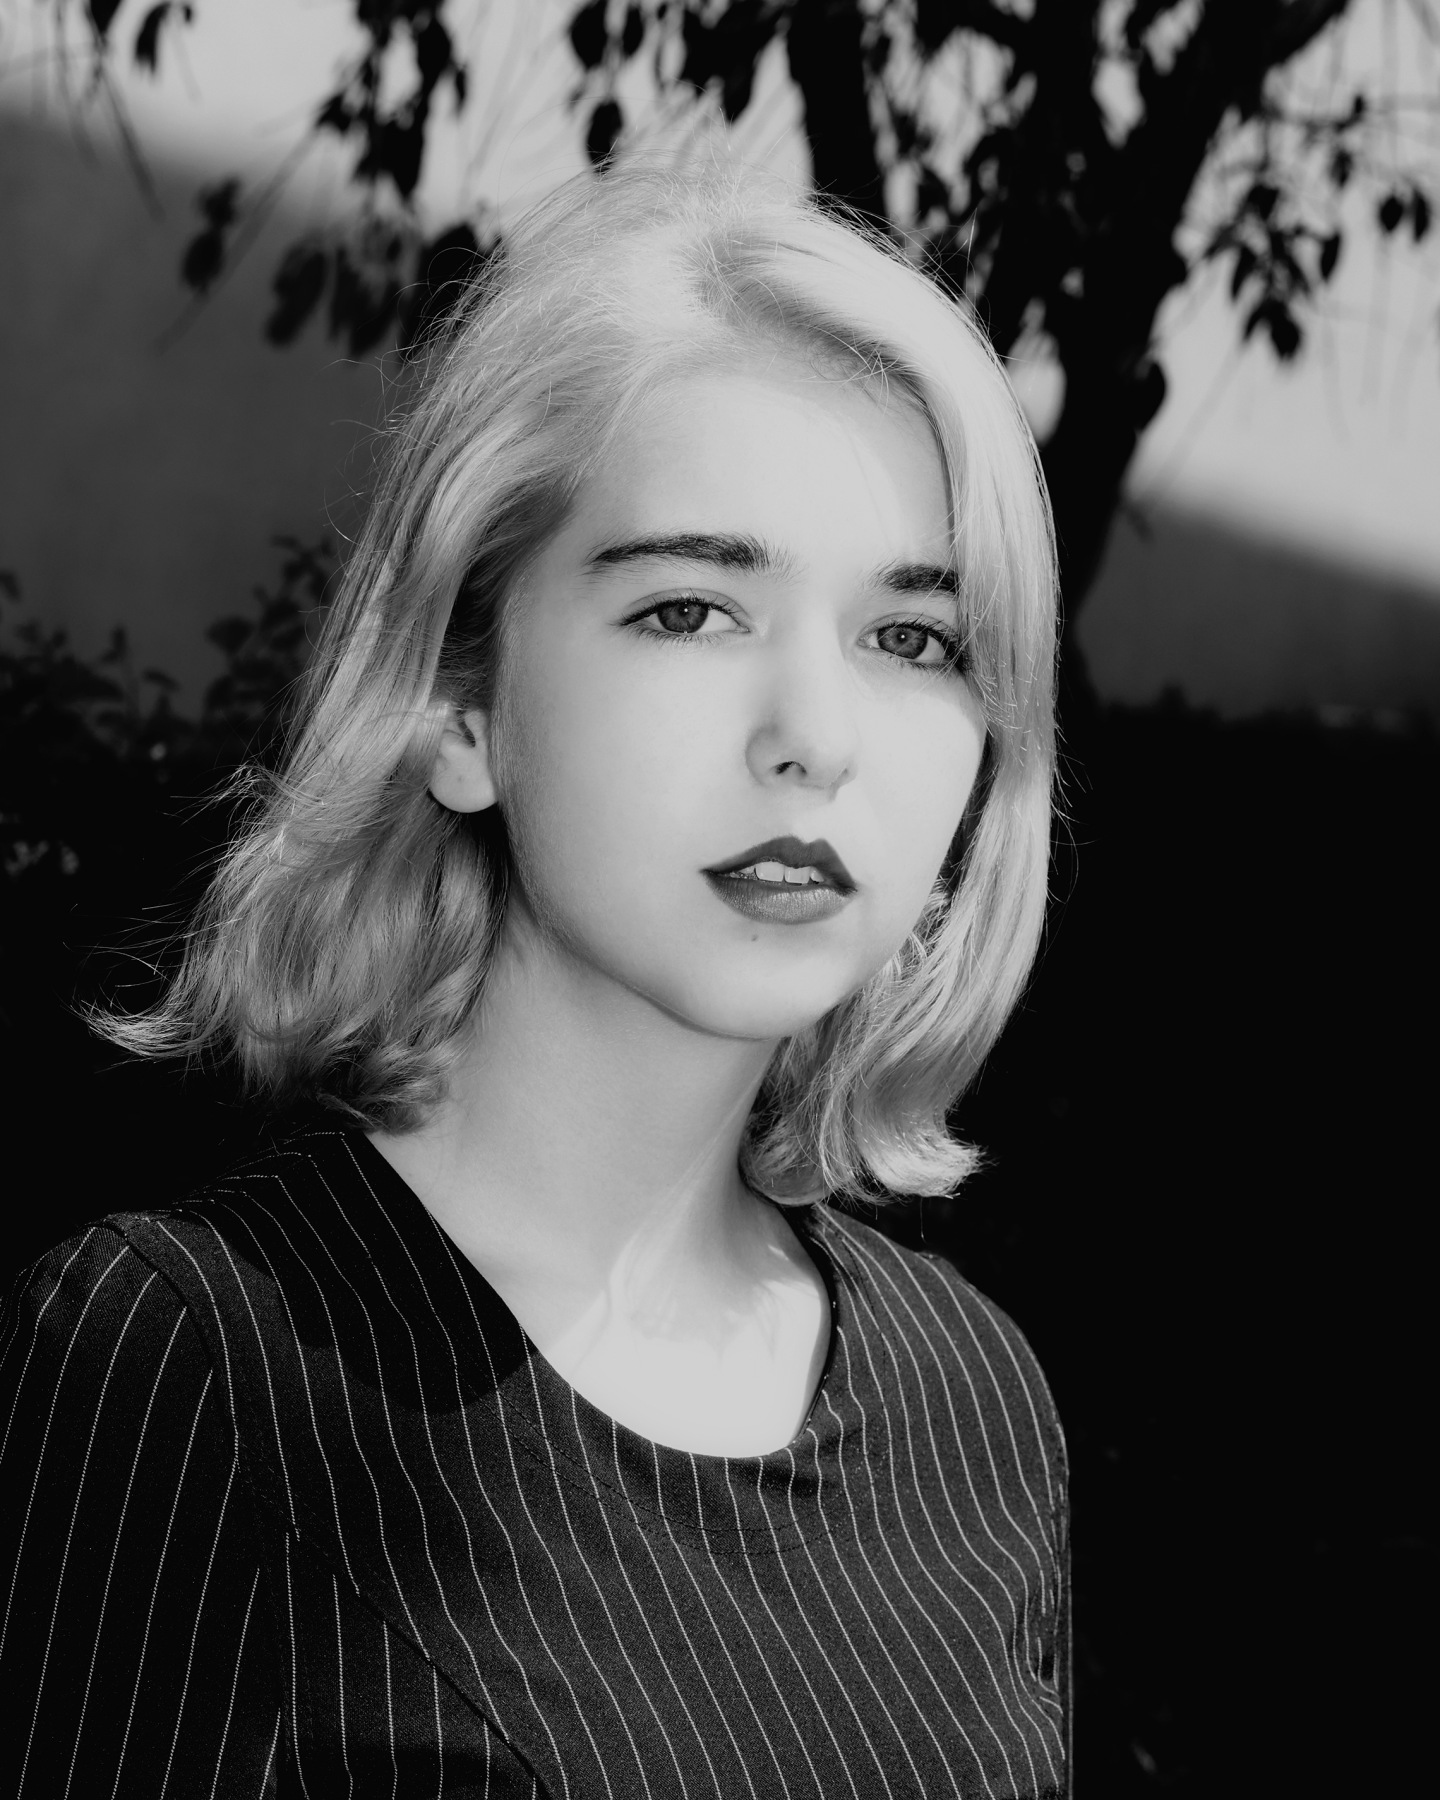 The Old-School Beauty Of Snail Mail’s Suburban Slowcore